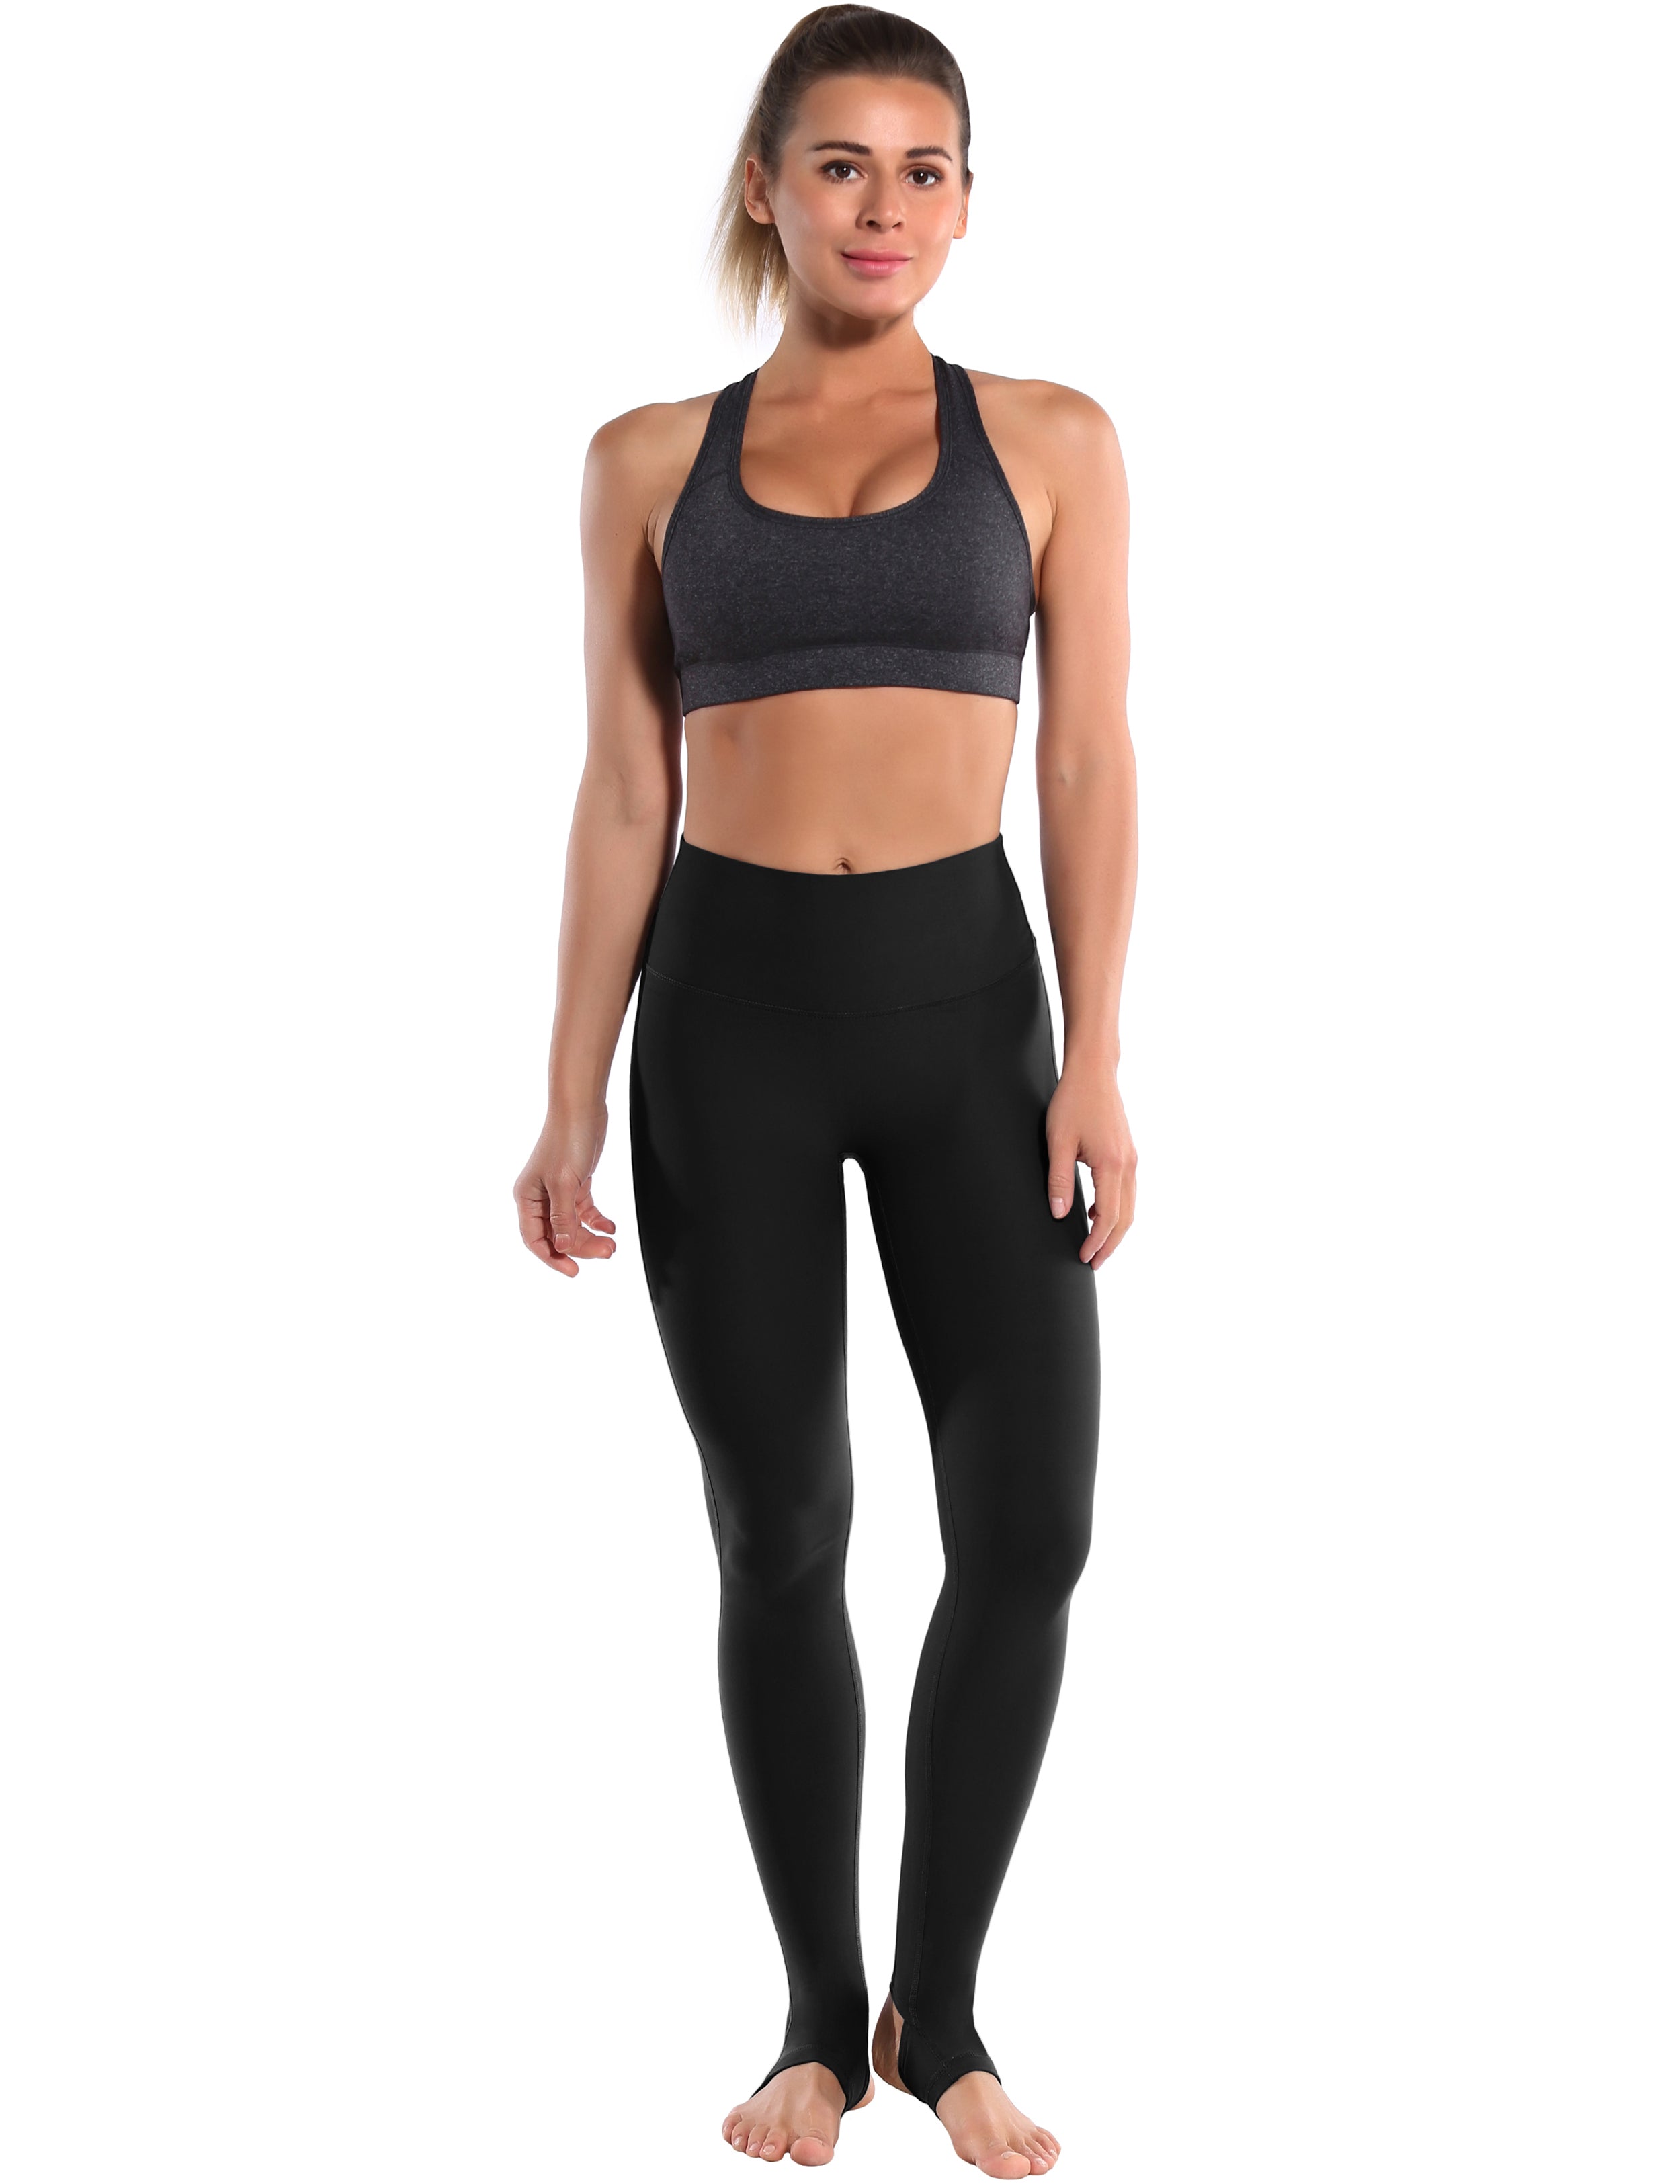 Over the Heel Jogging Pants black Over the Heel Design 87%Nylon/13%Spandex Fabric doesn't attract lint easily 4-way stretch No see-through Moisture-wicking Tummy control